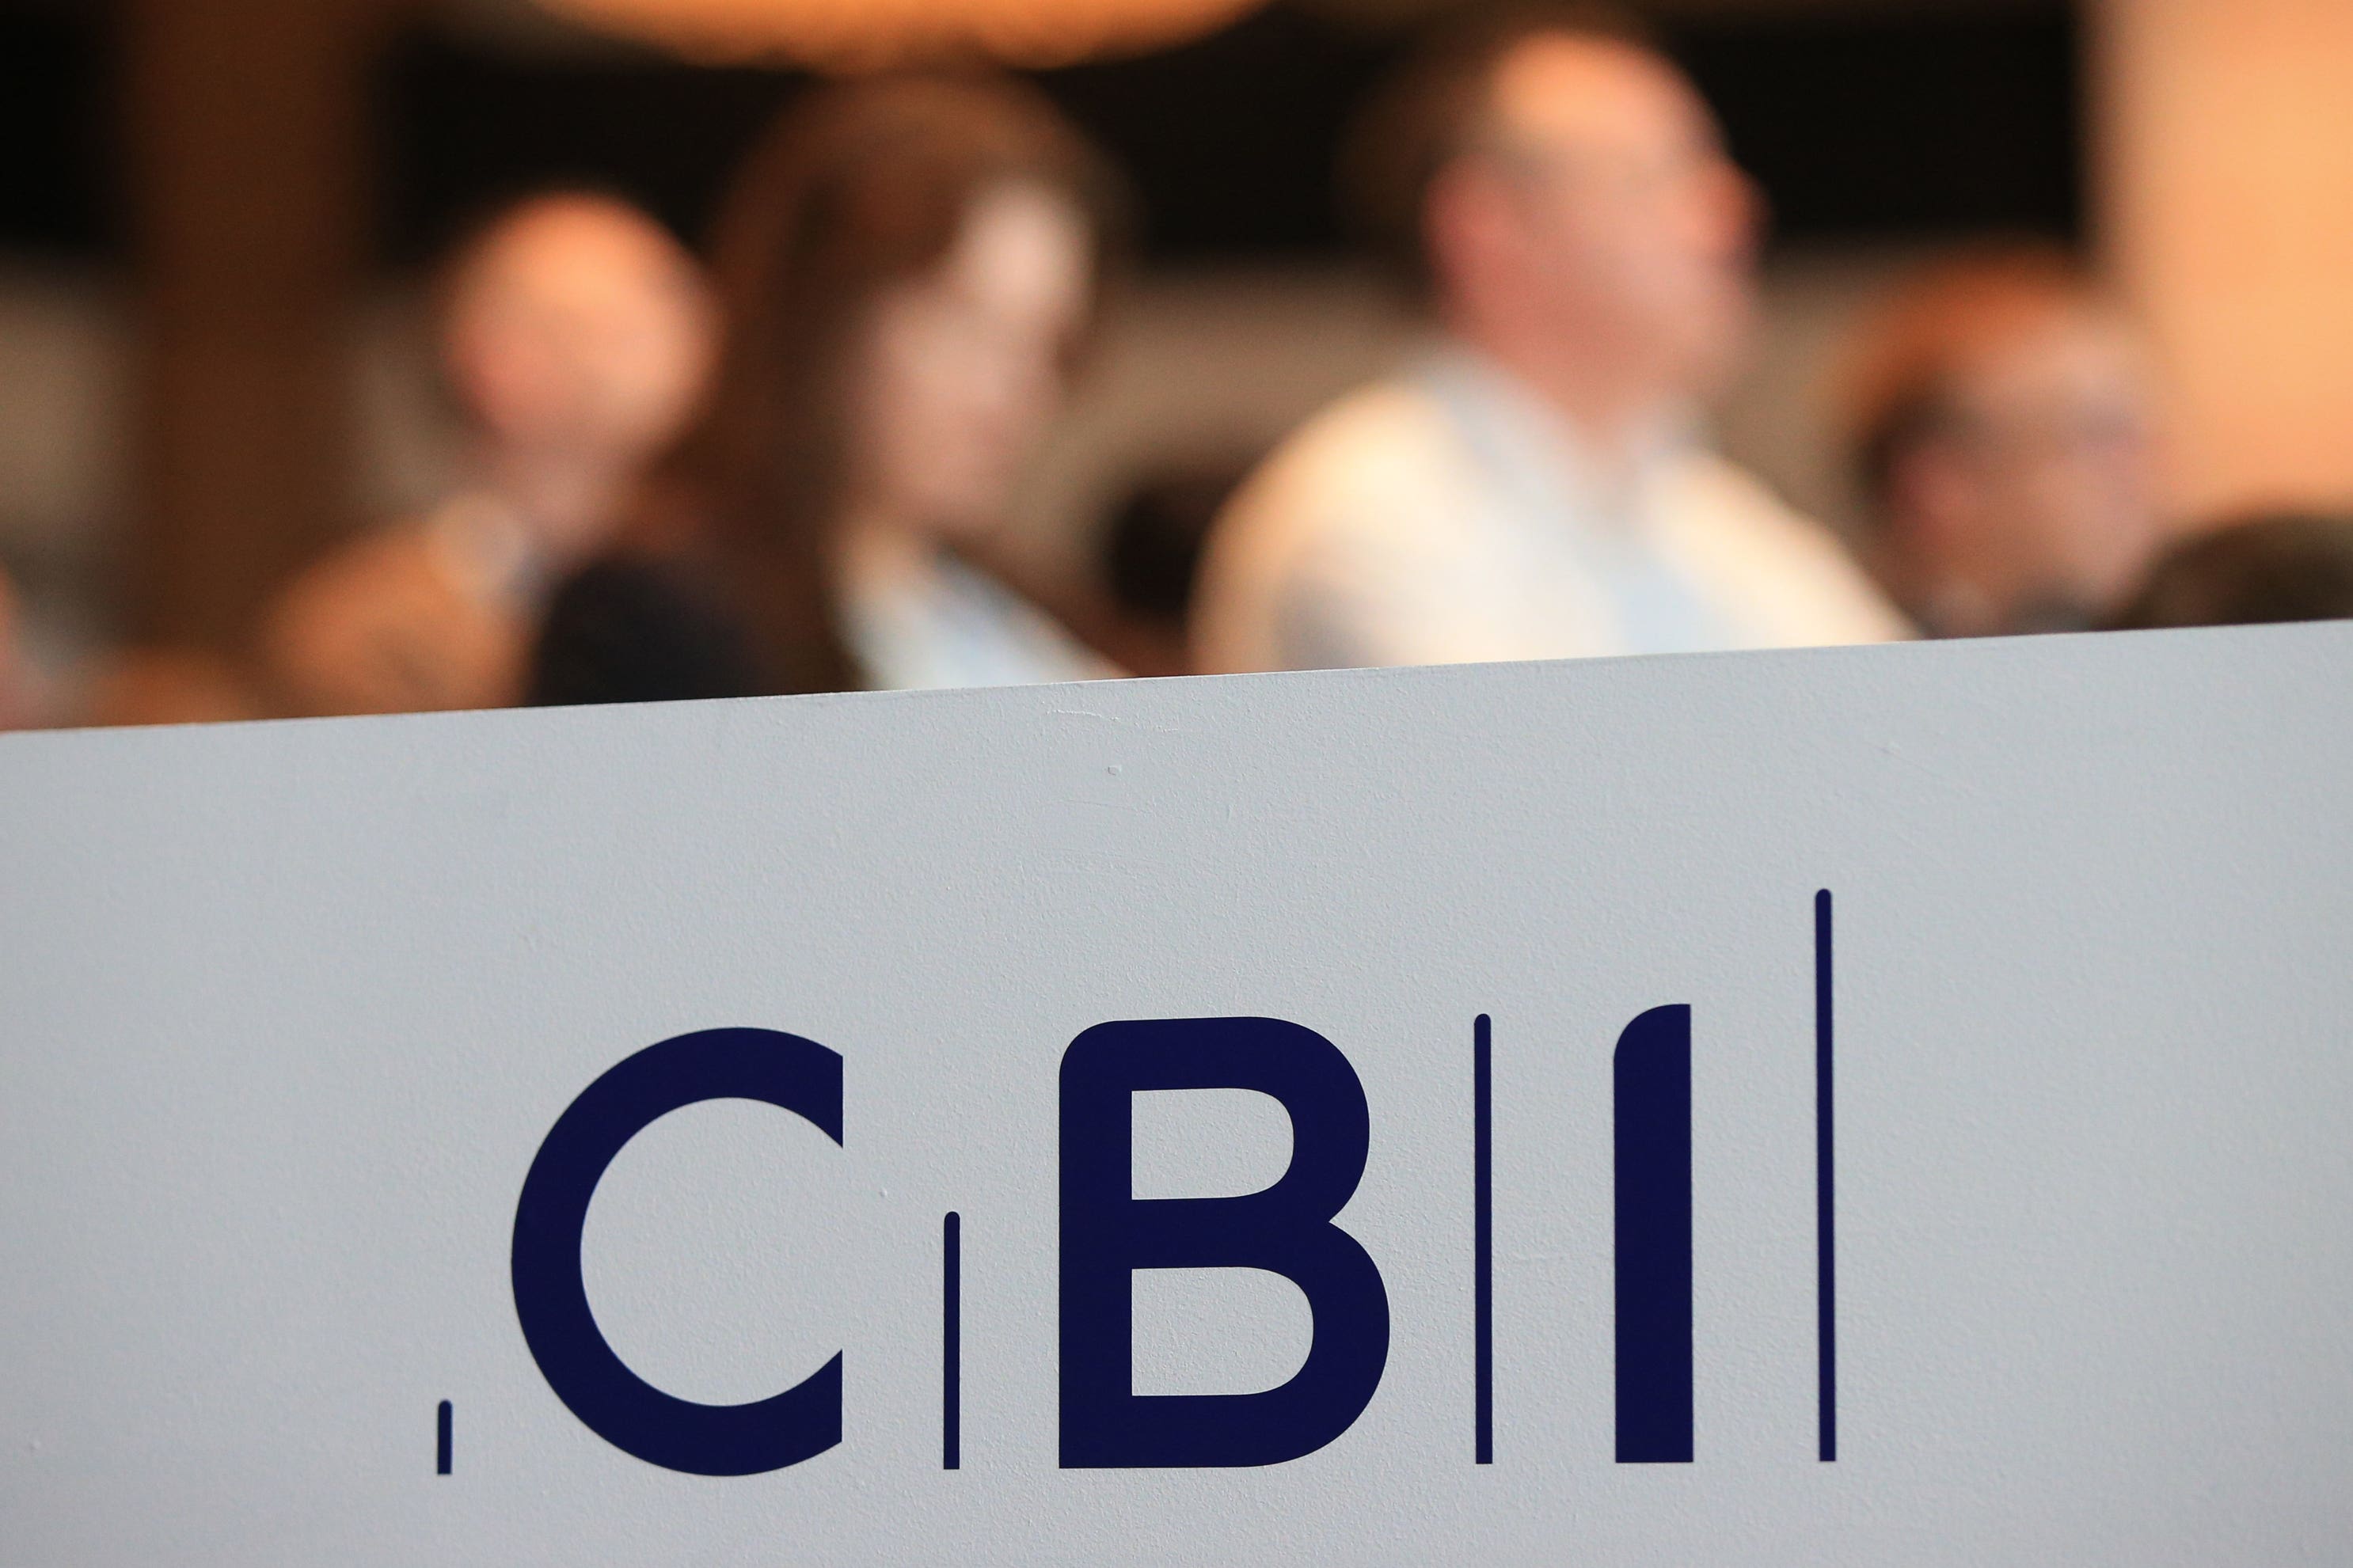 The CBI’s Annual General Meeting was meant to take place on Wednesday. (Jonathan Brady/PA)